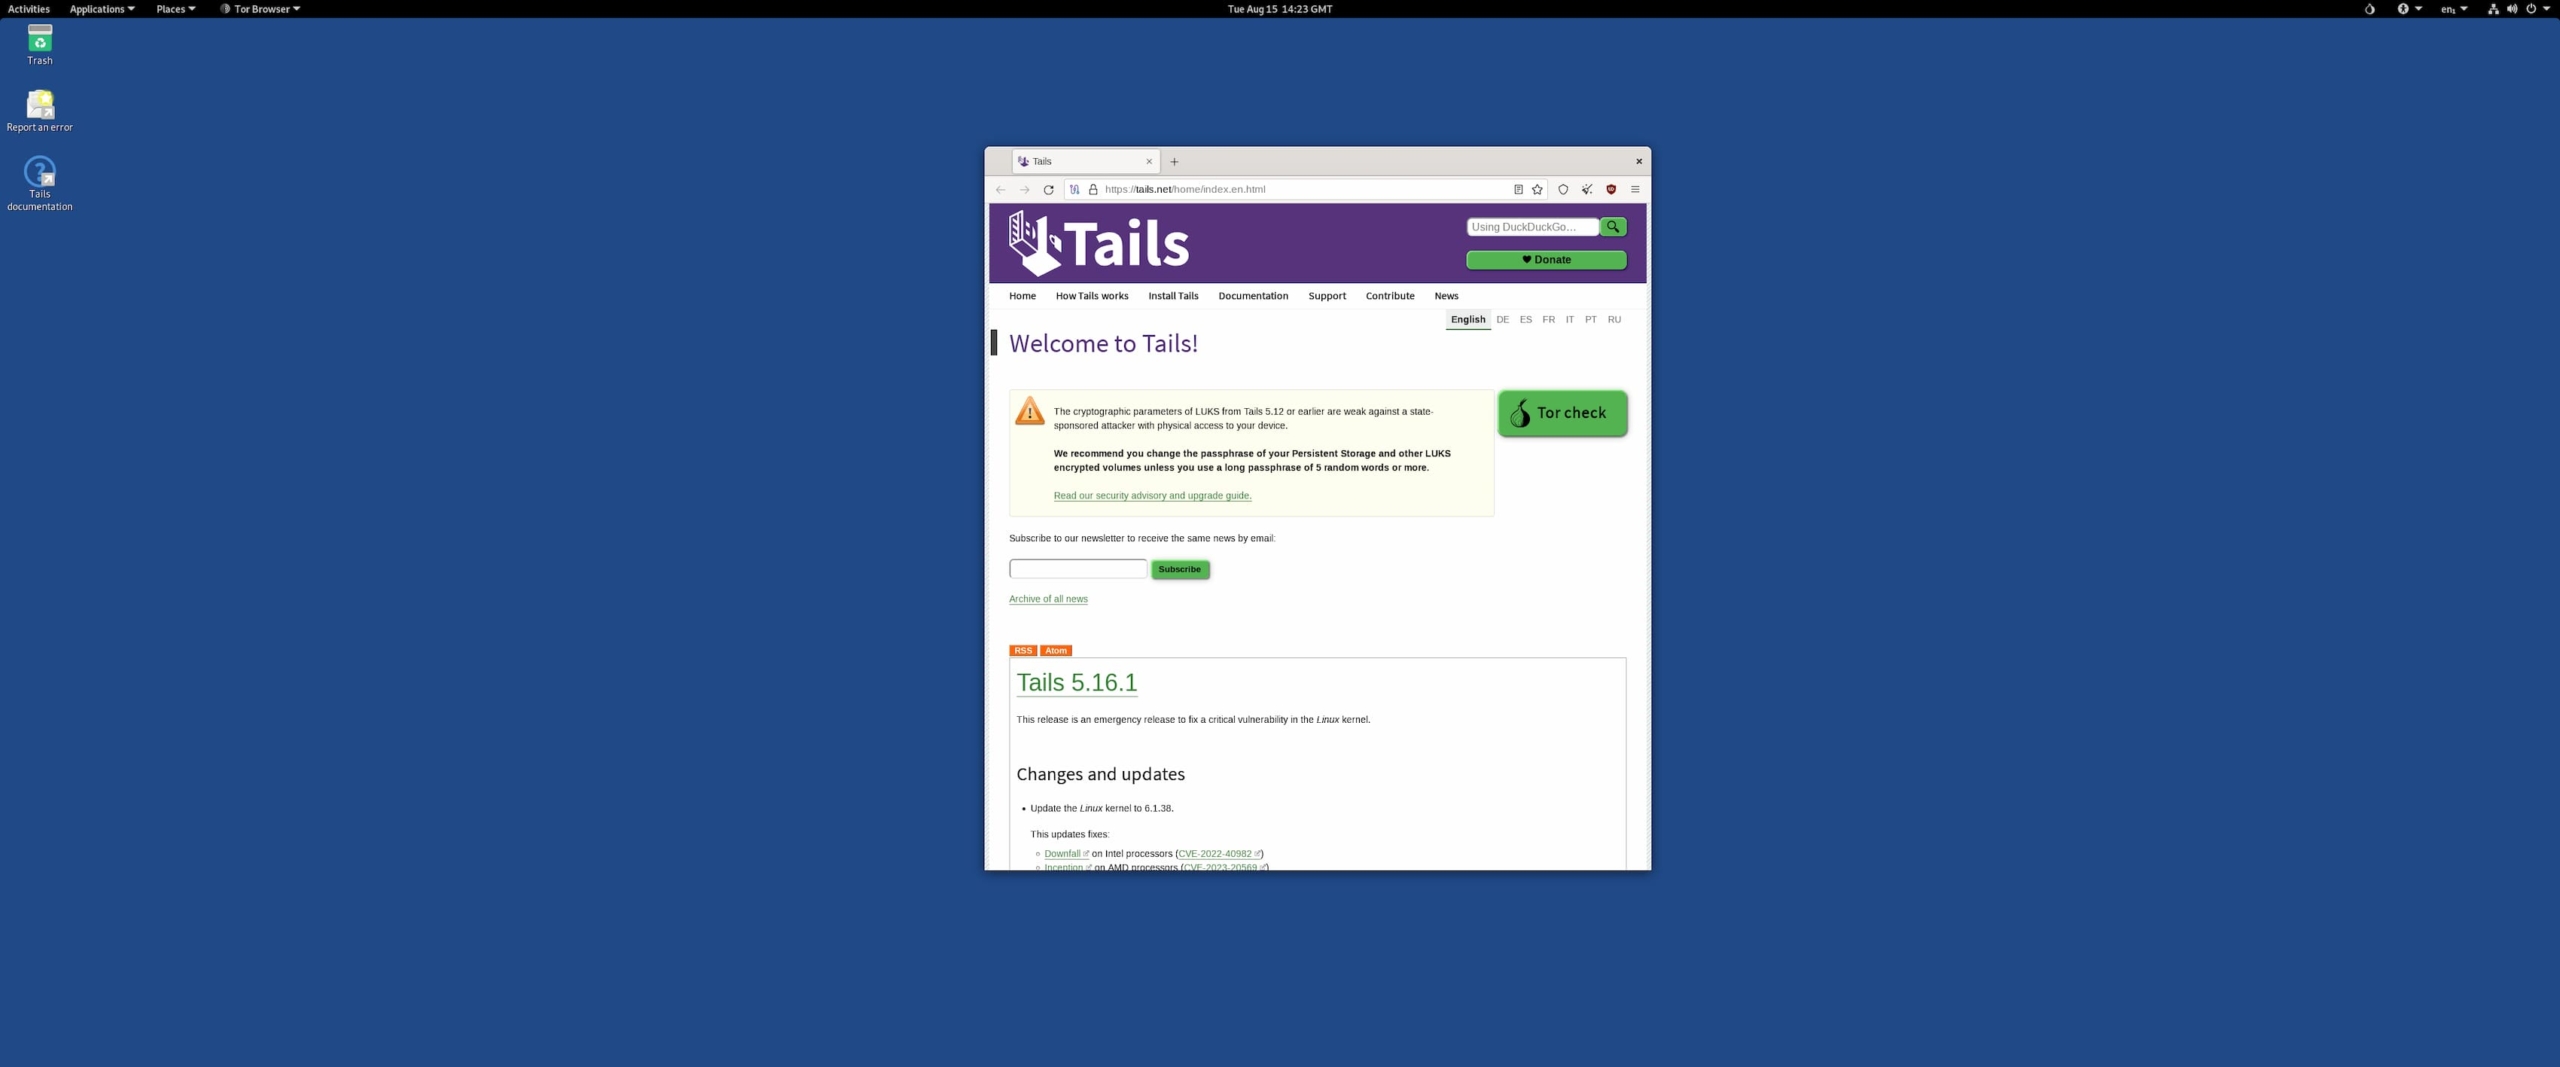 Welcome to Tails page